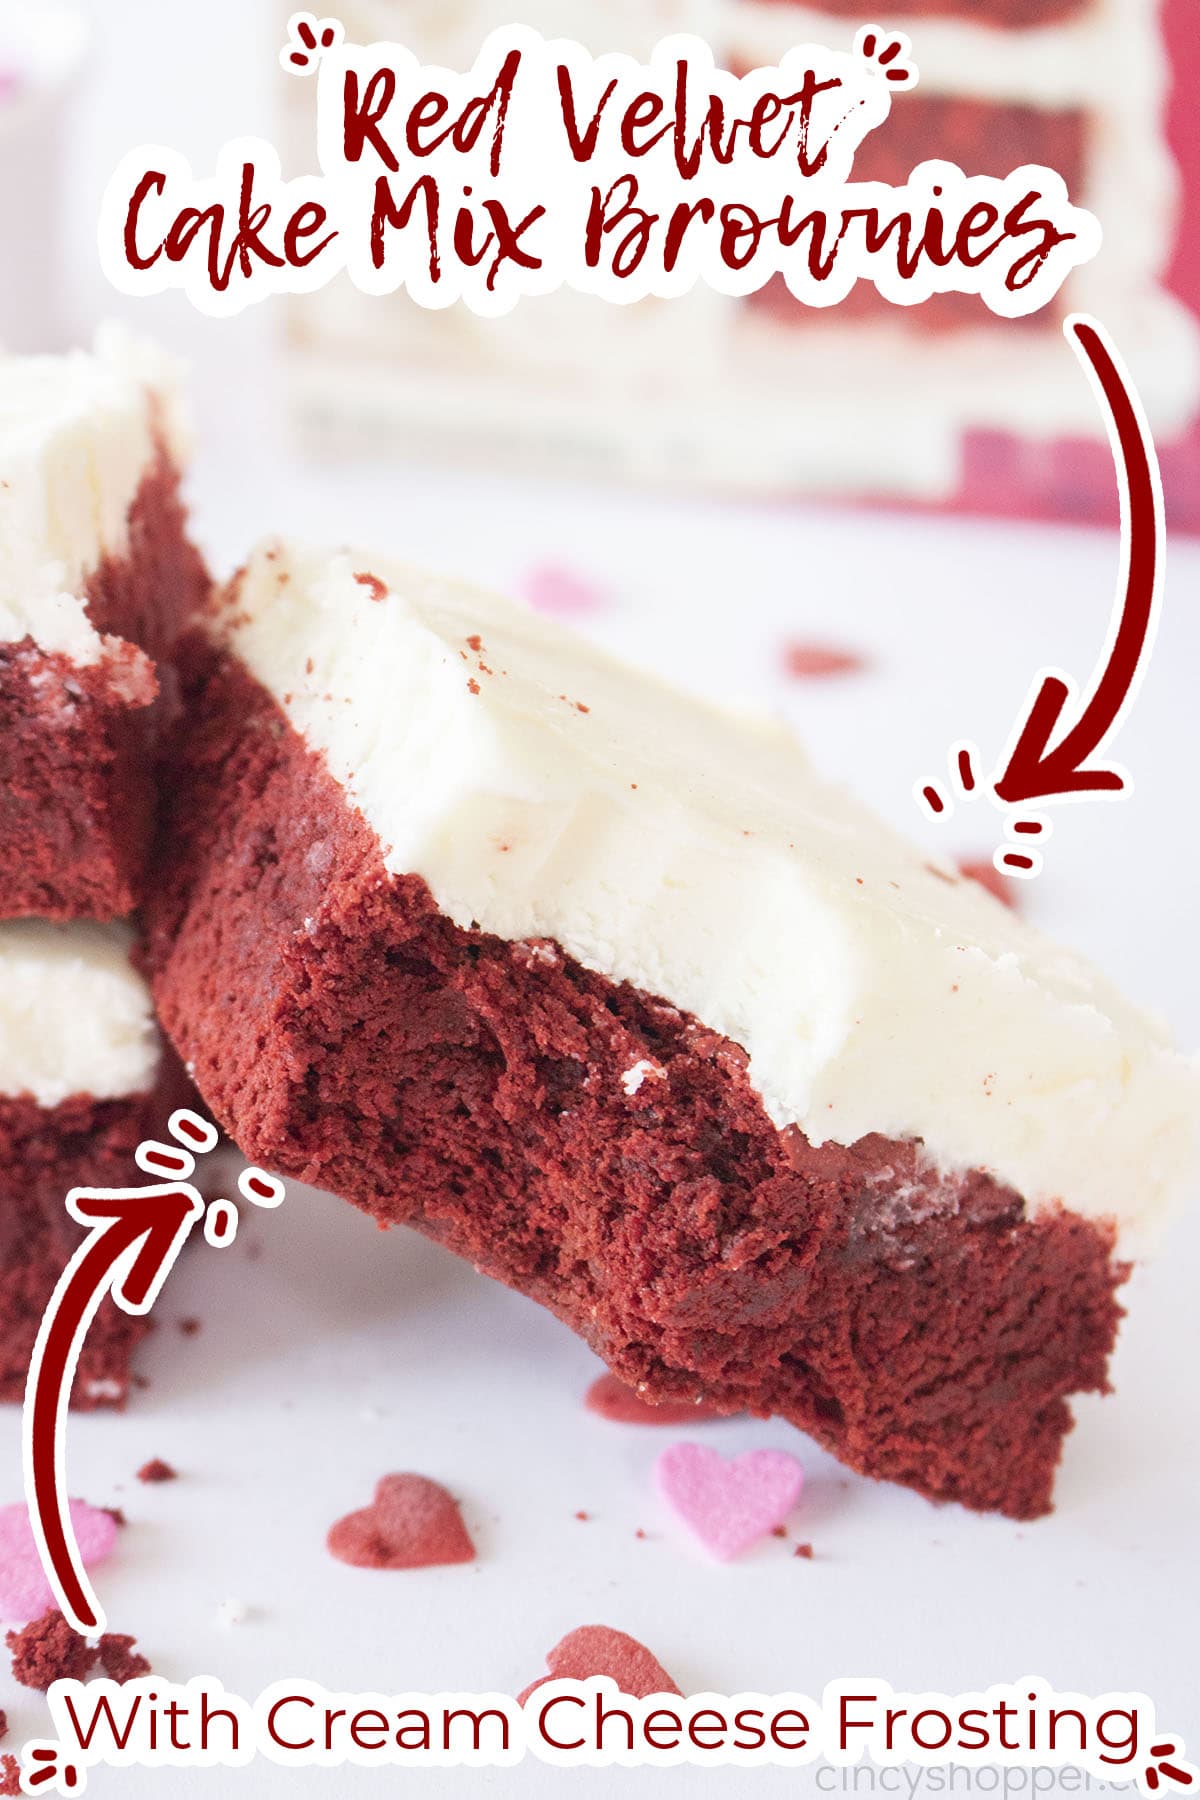 Text on image Red Velvet Cake Mix Brownies with Cream Cheese Frosting.